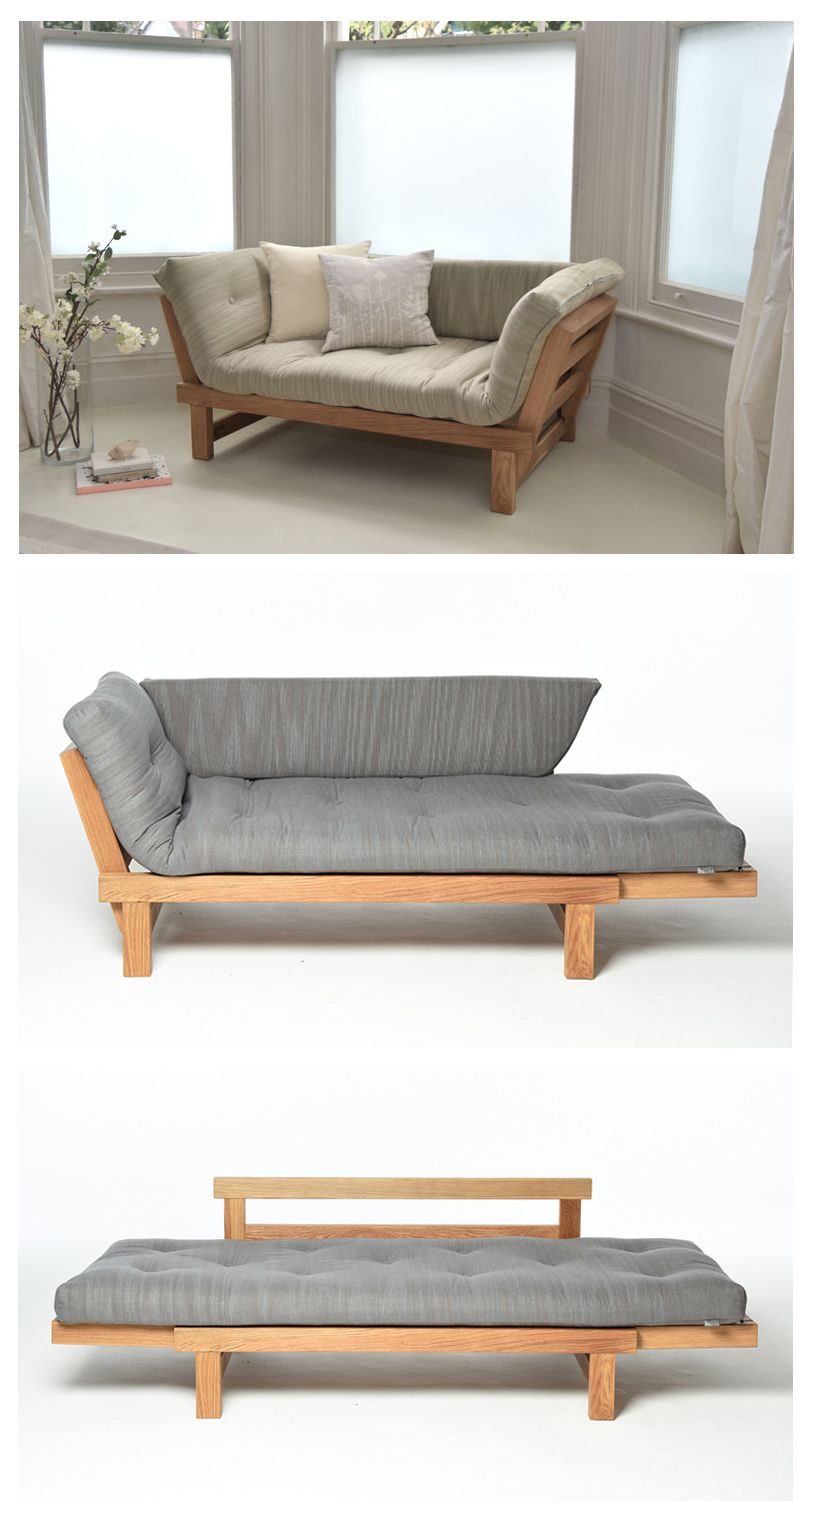 Futon Sofa Beds: The Perfect Solution for
Small Spaces